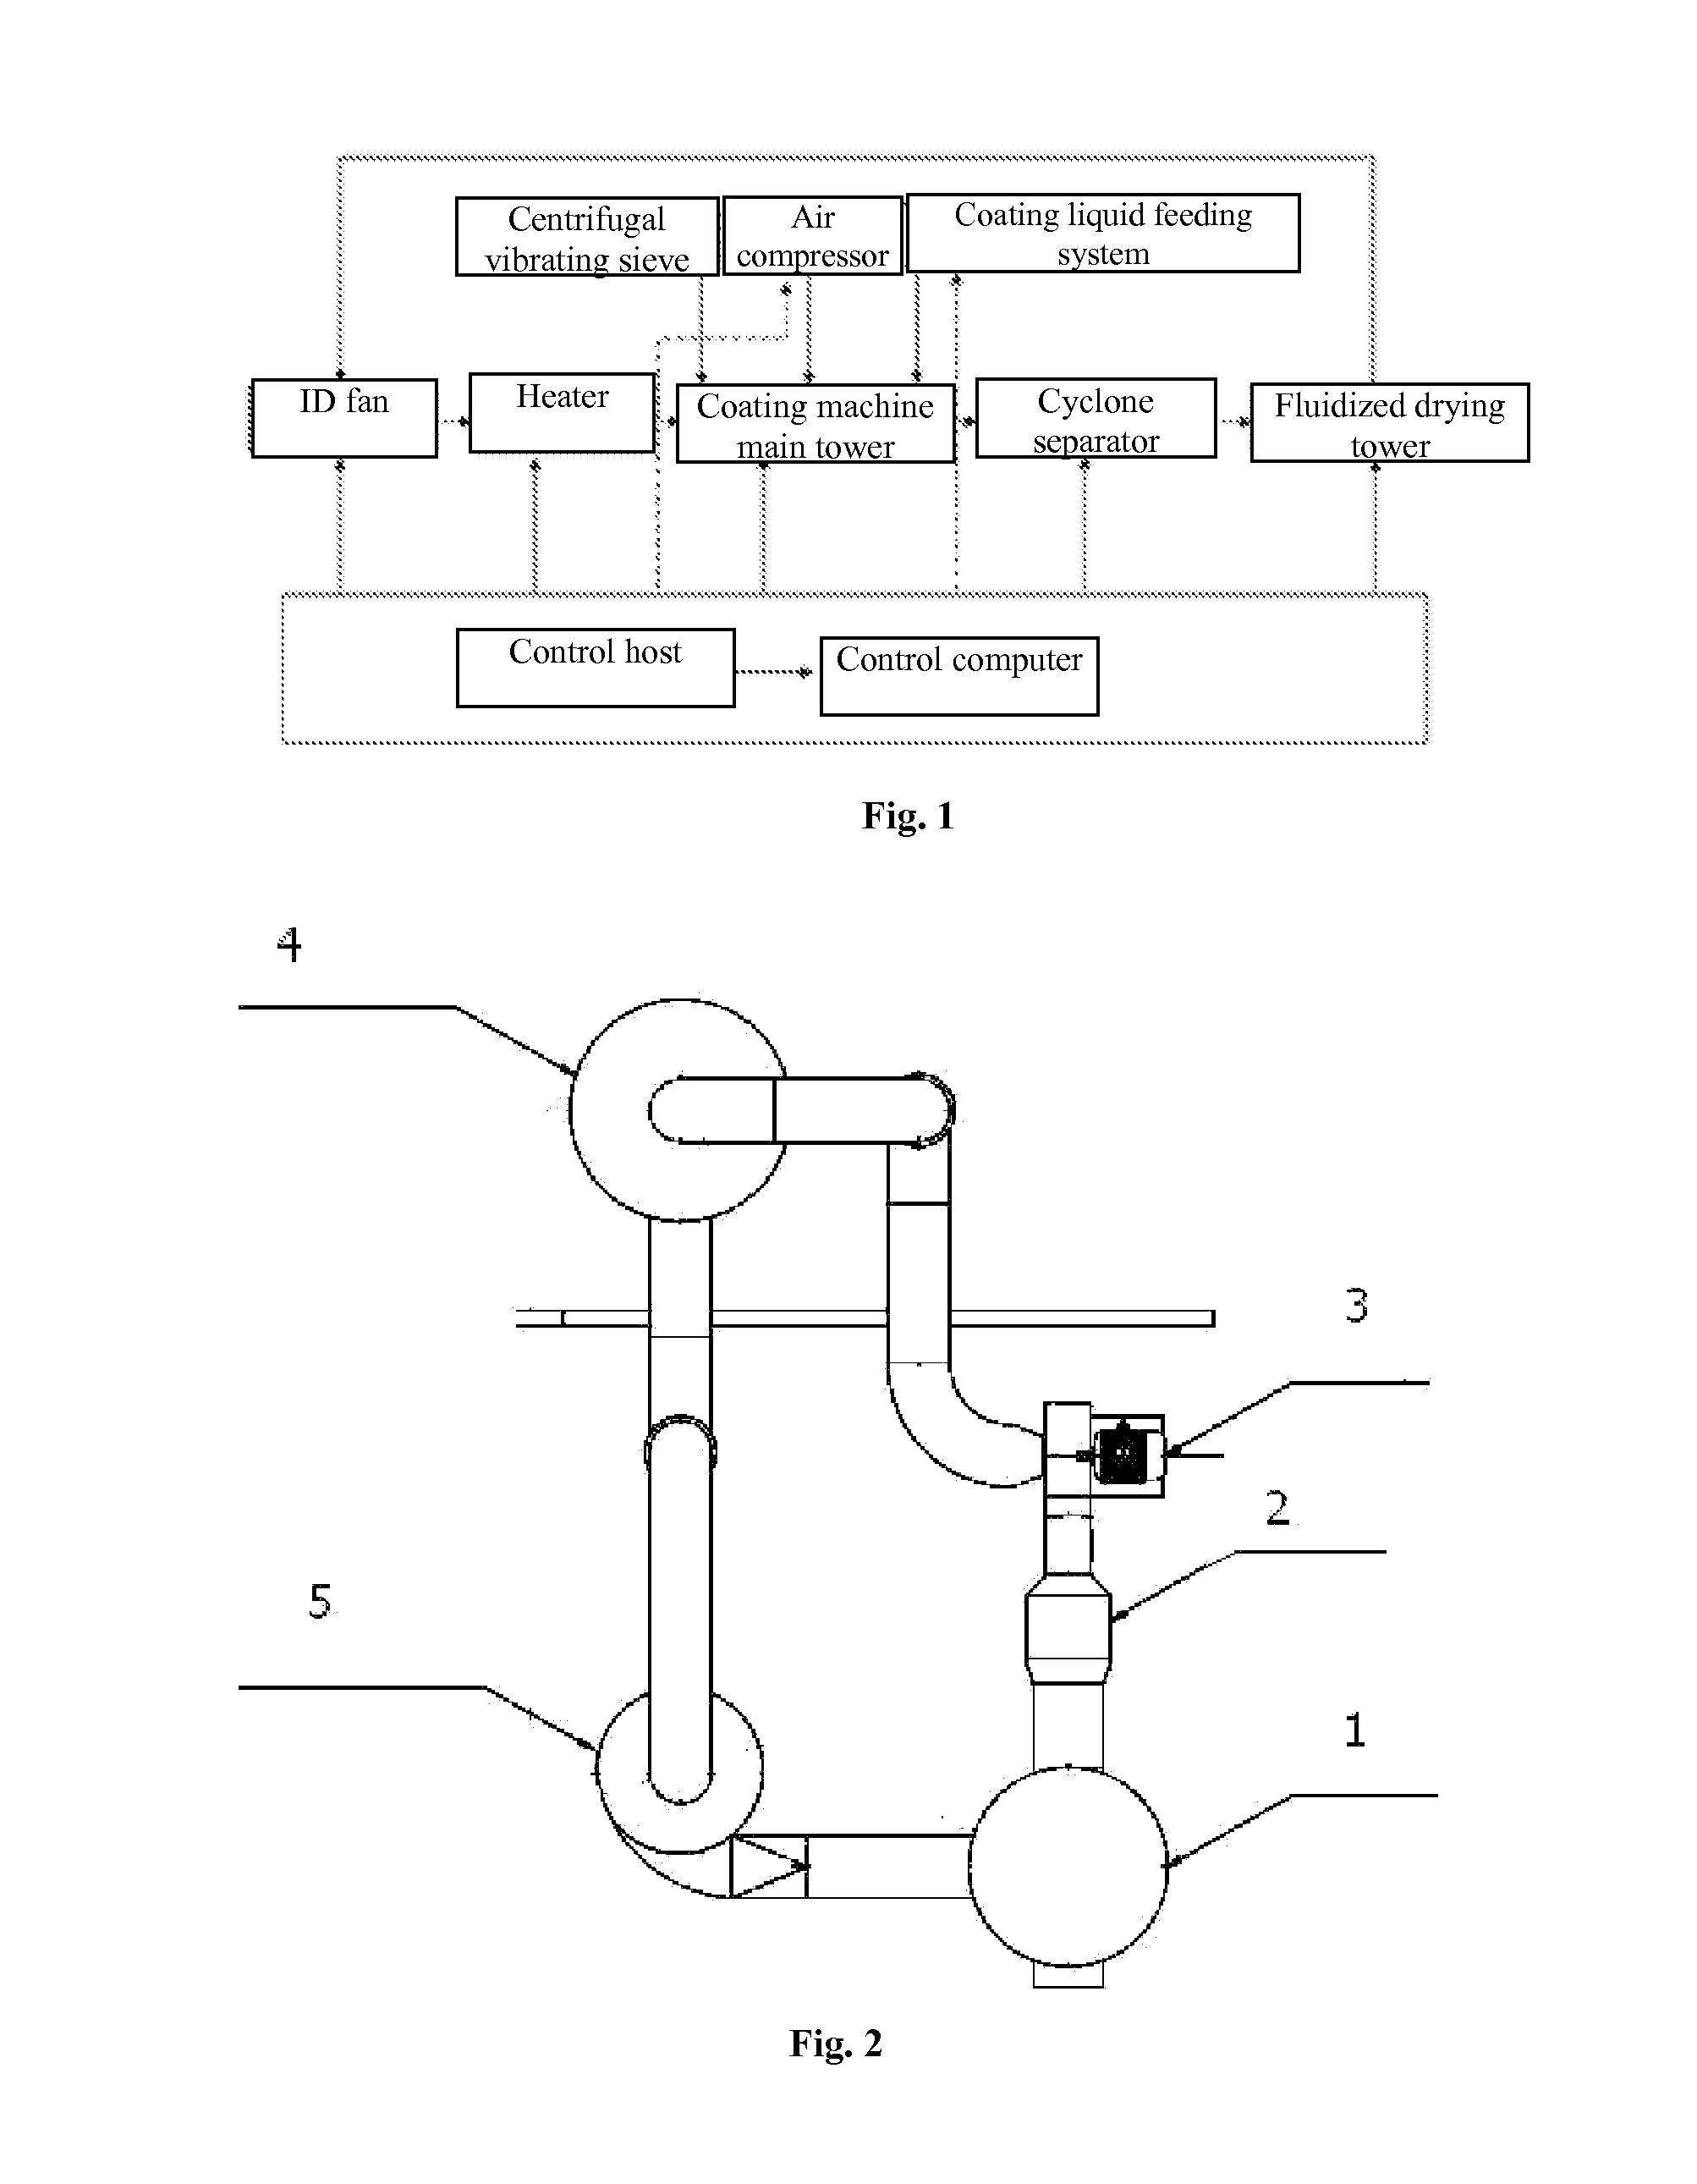 Method for Preparing Controlled Release Fertilizer with Water-Based Coating on the Basis of Closed Circulating Fluidized Bed, and Device therefor